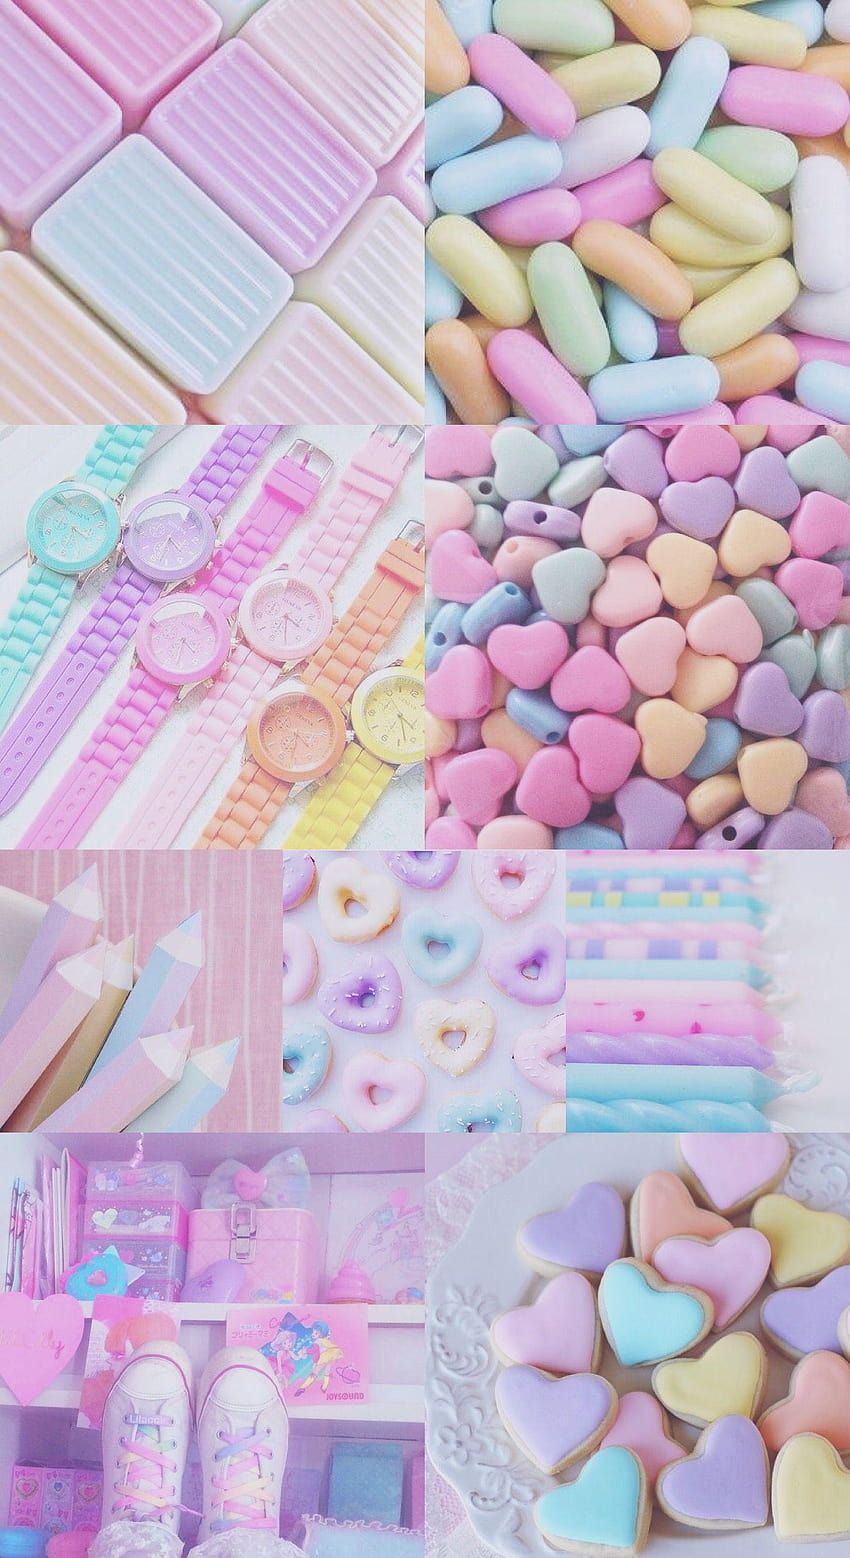 Aesthetic pastel background with sweets, candy, donuts, and cookies. - Pastel rainbow, candy